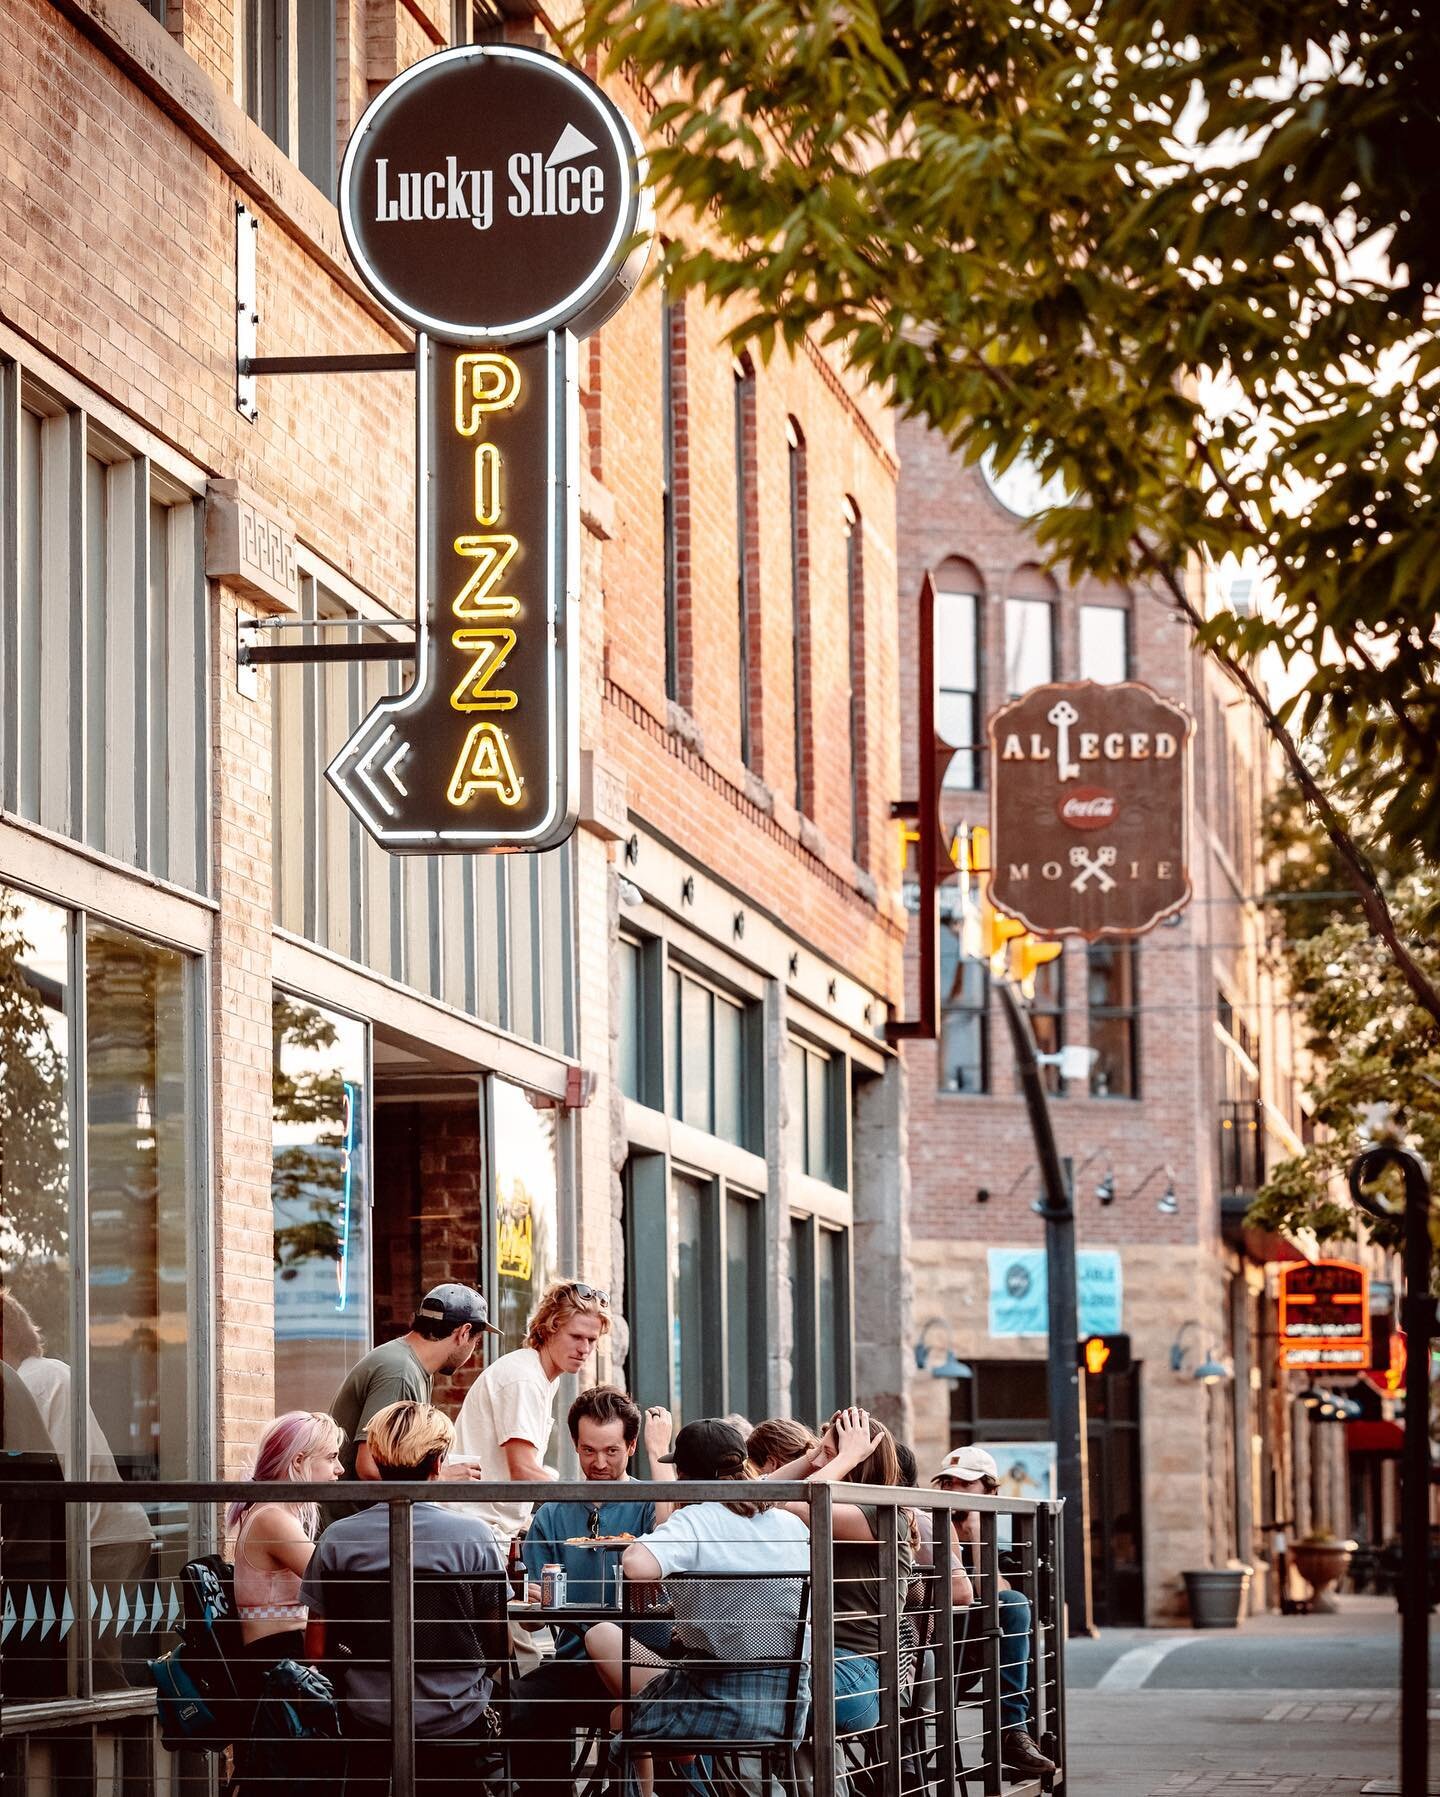 Grab the homies and snag a front row seat to 25th street on our new patio in Ogden!

A great place to heckle people on scooters, watch tough guys obnoxiously rev their egos &amp; engines, and even witness an occasional yelling match between a person 